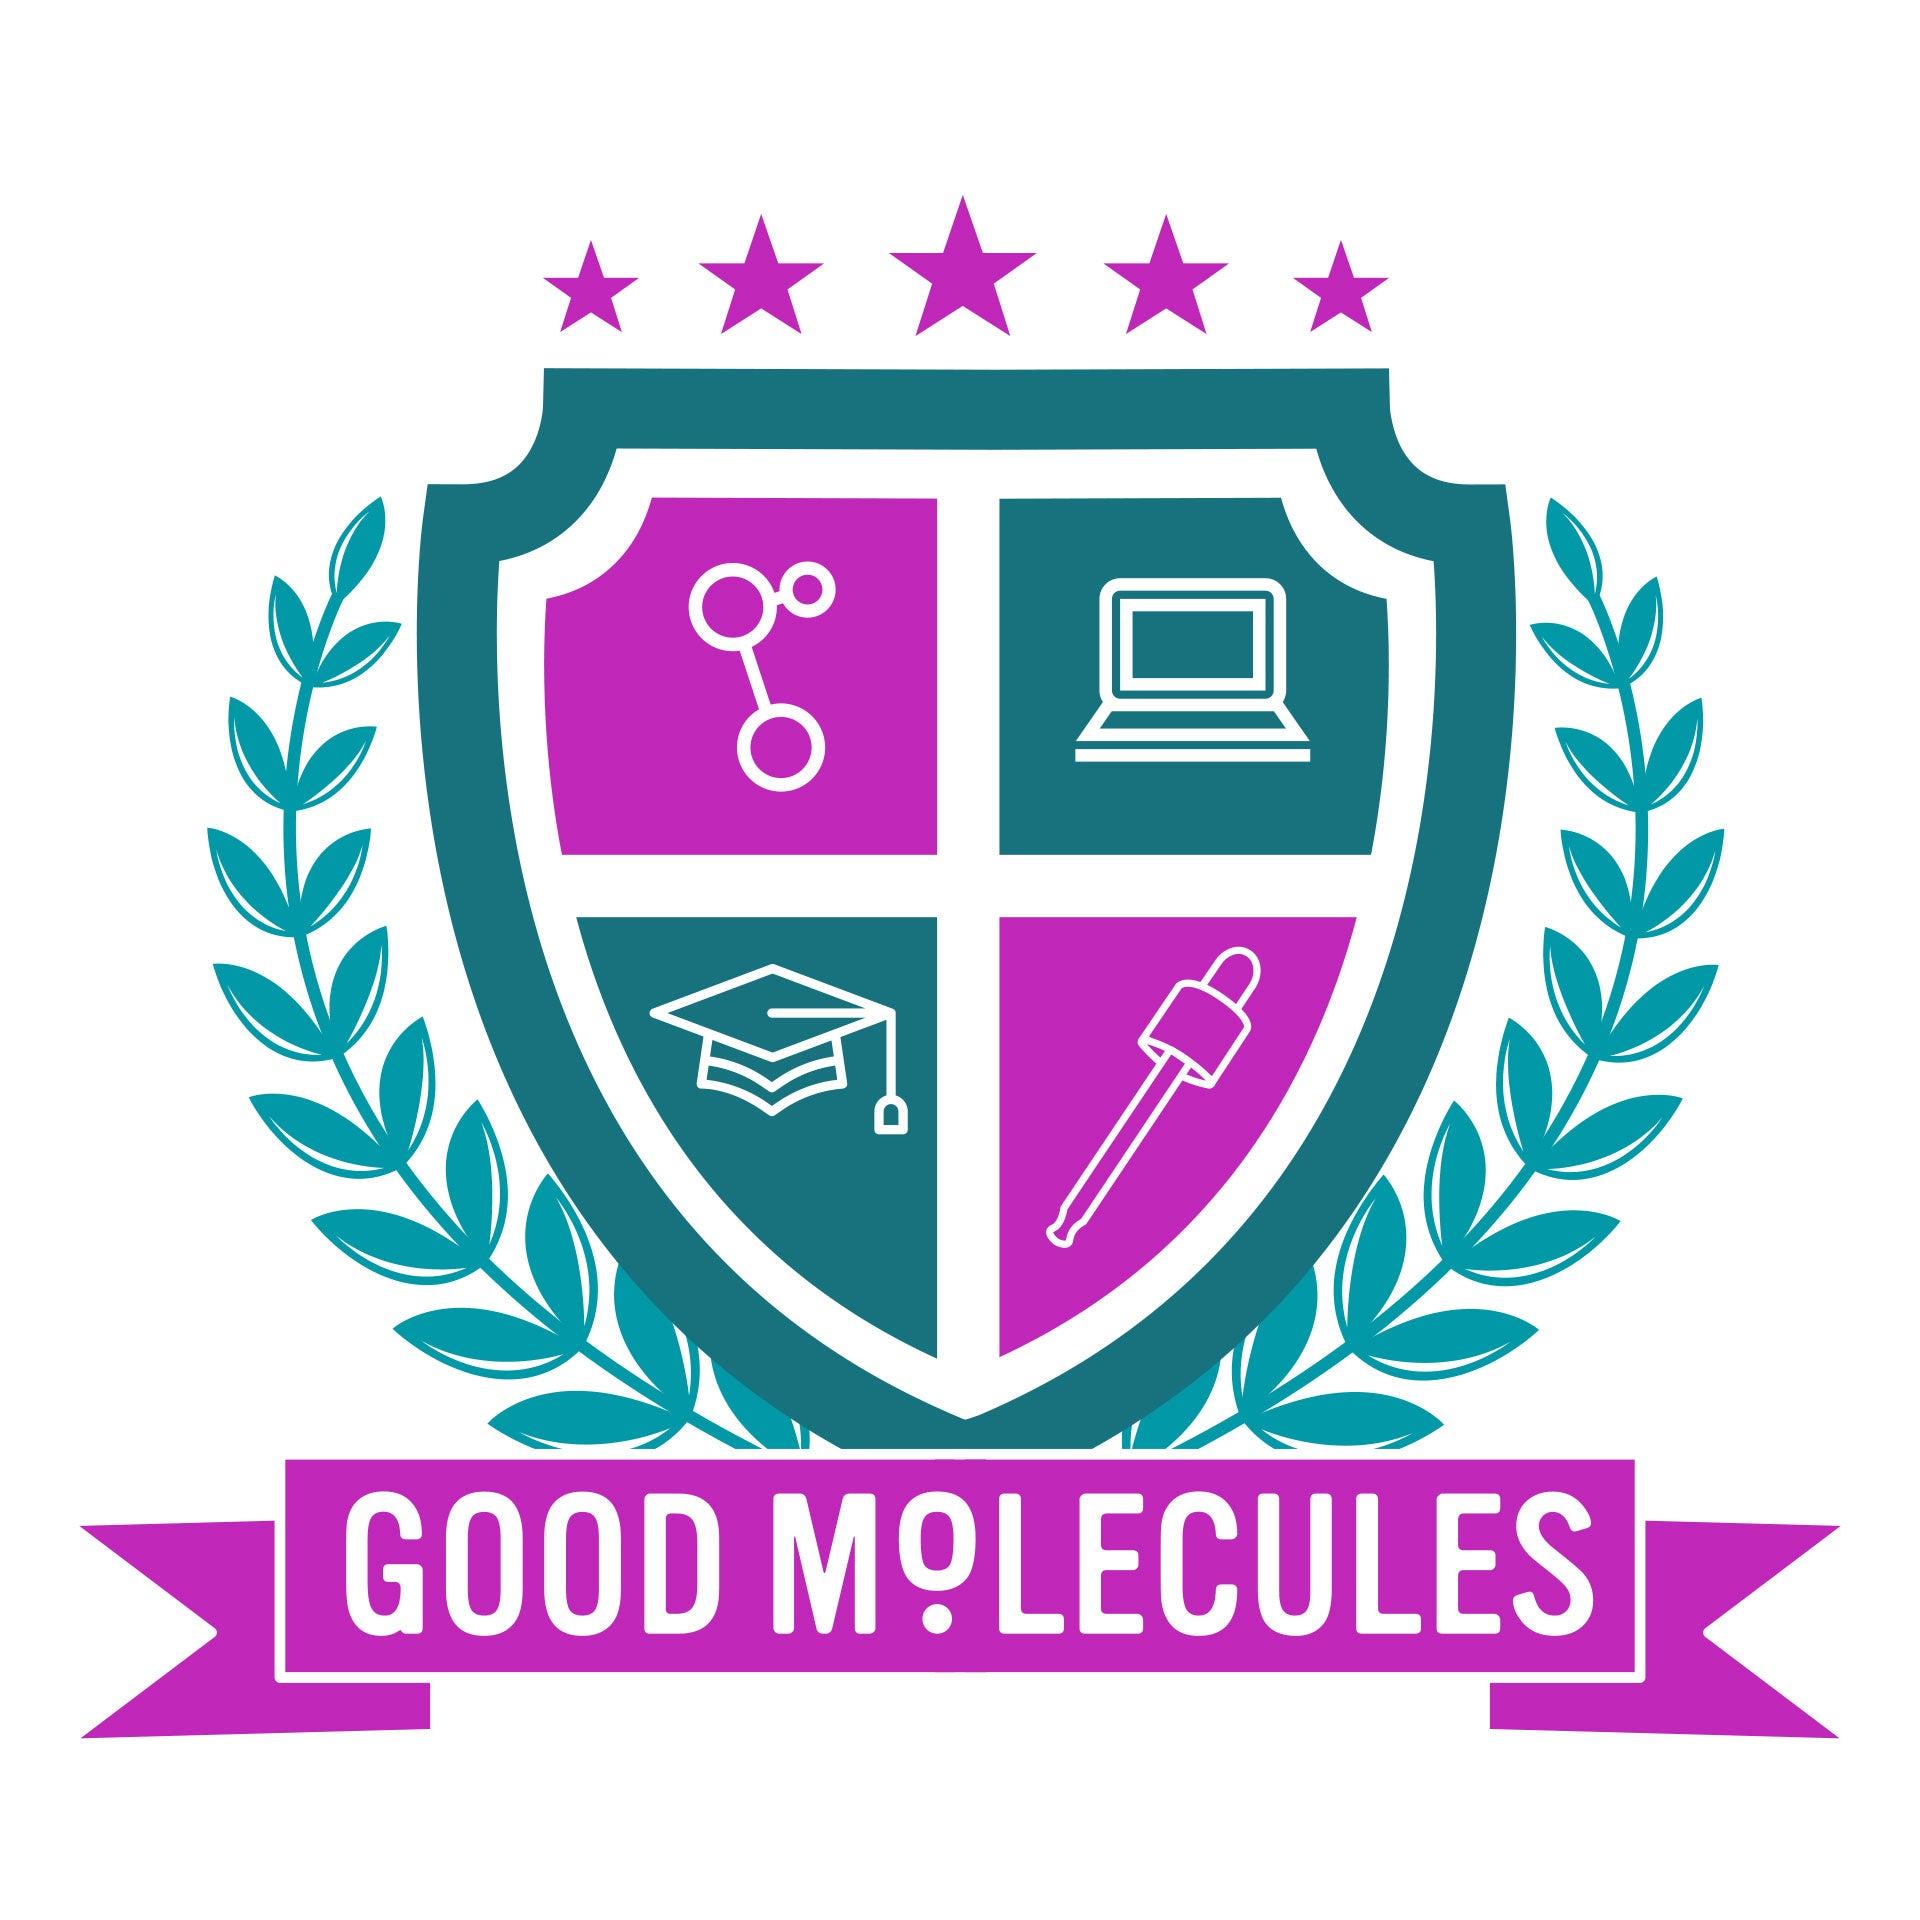 Good Molecules is coming to Belmont University!